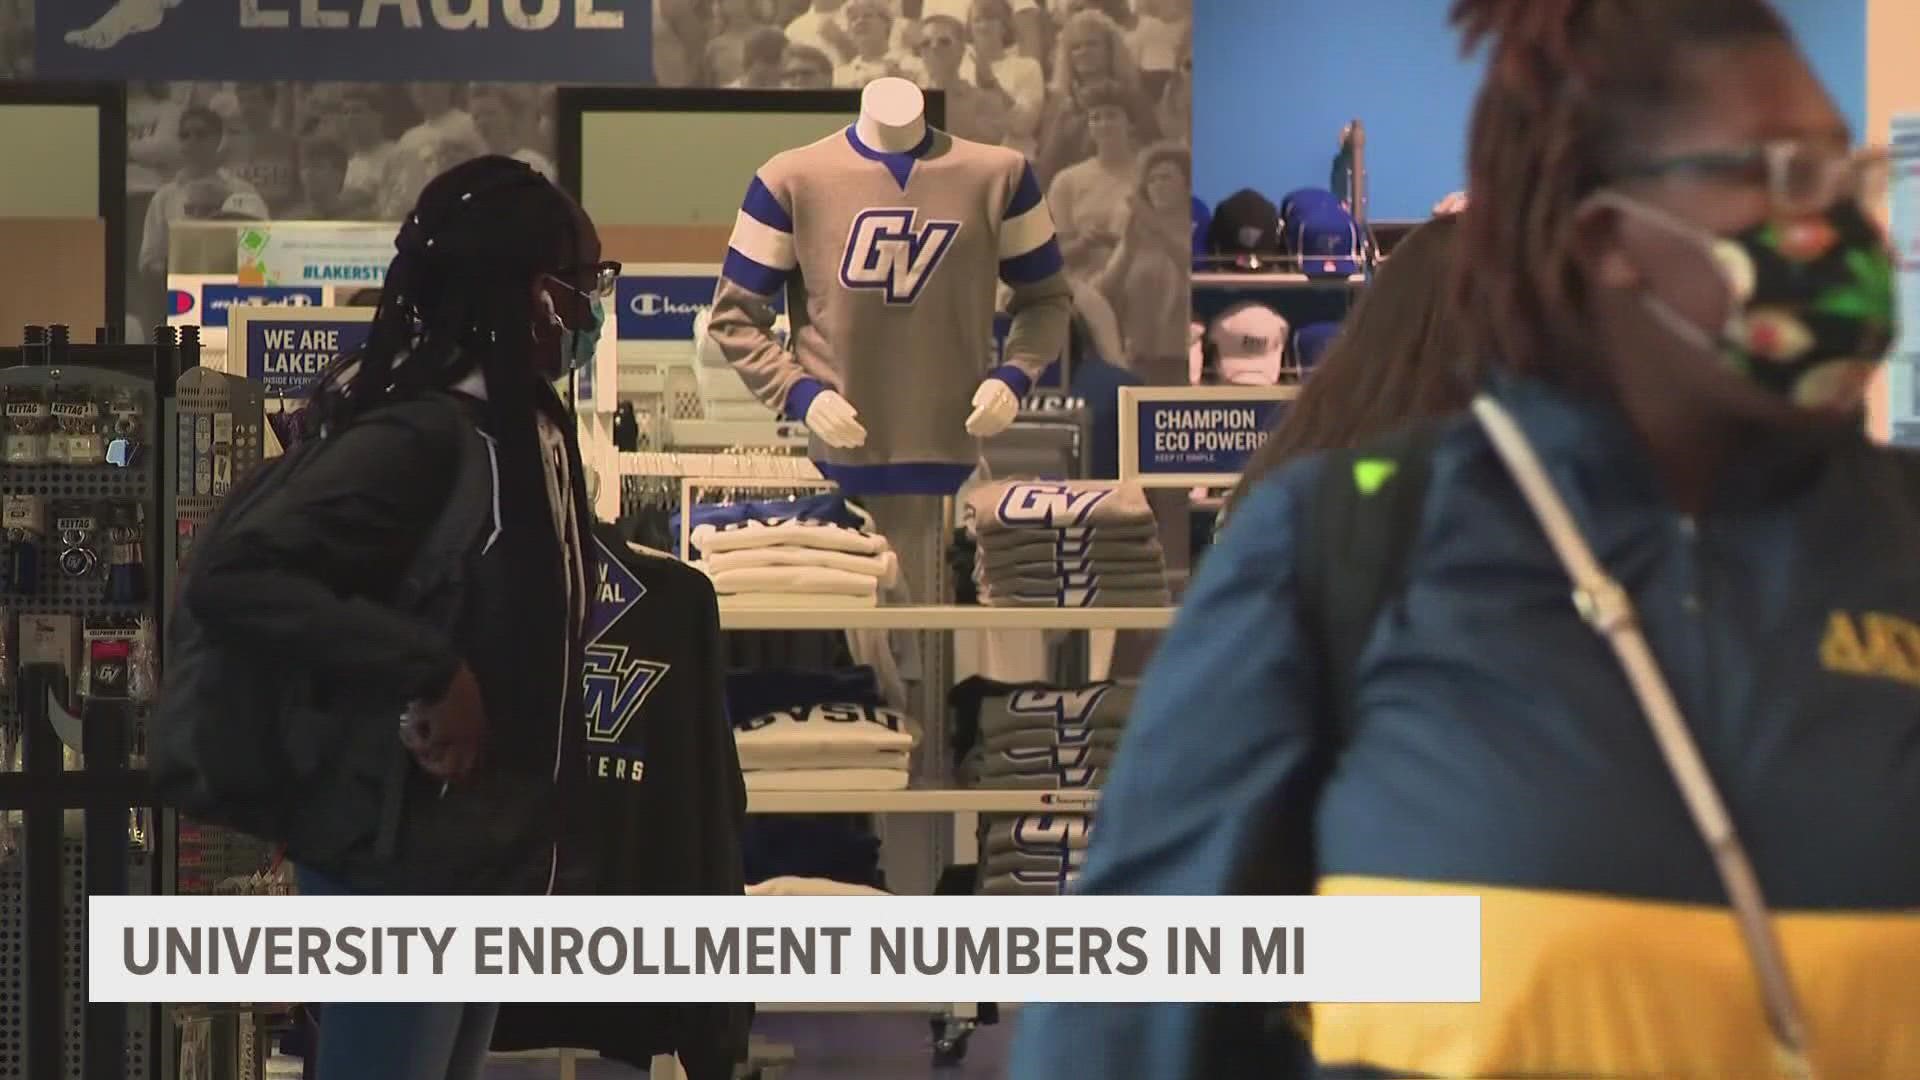 With reports coming out saying Michigan Universities have seen a decrease in enrollment as much as 15 percent--we're looking into local numbers.